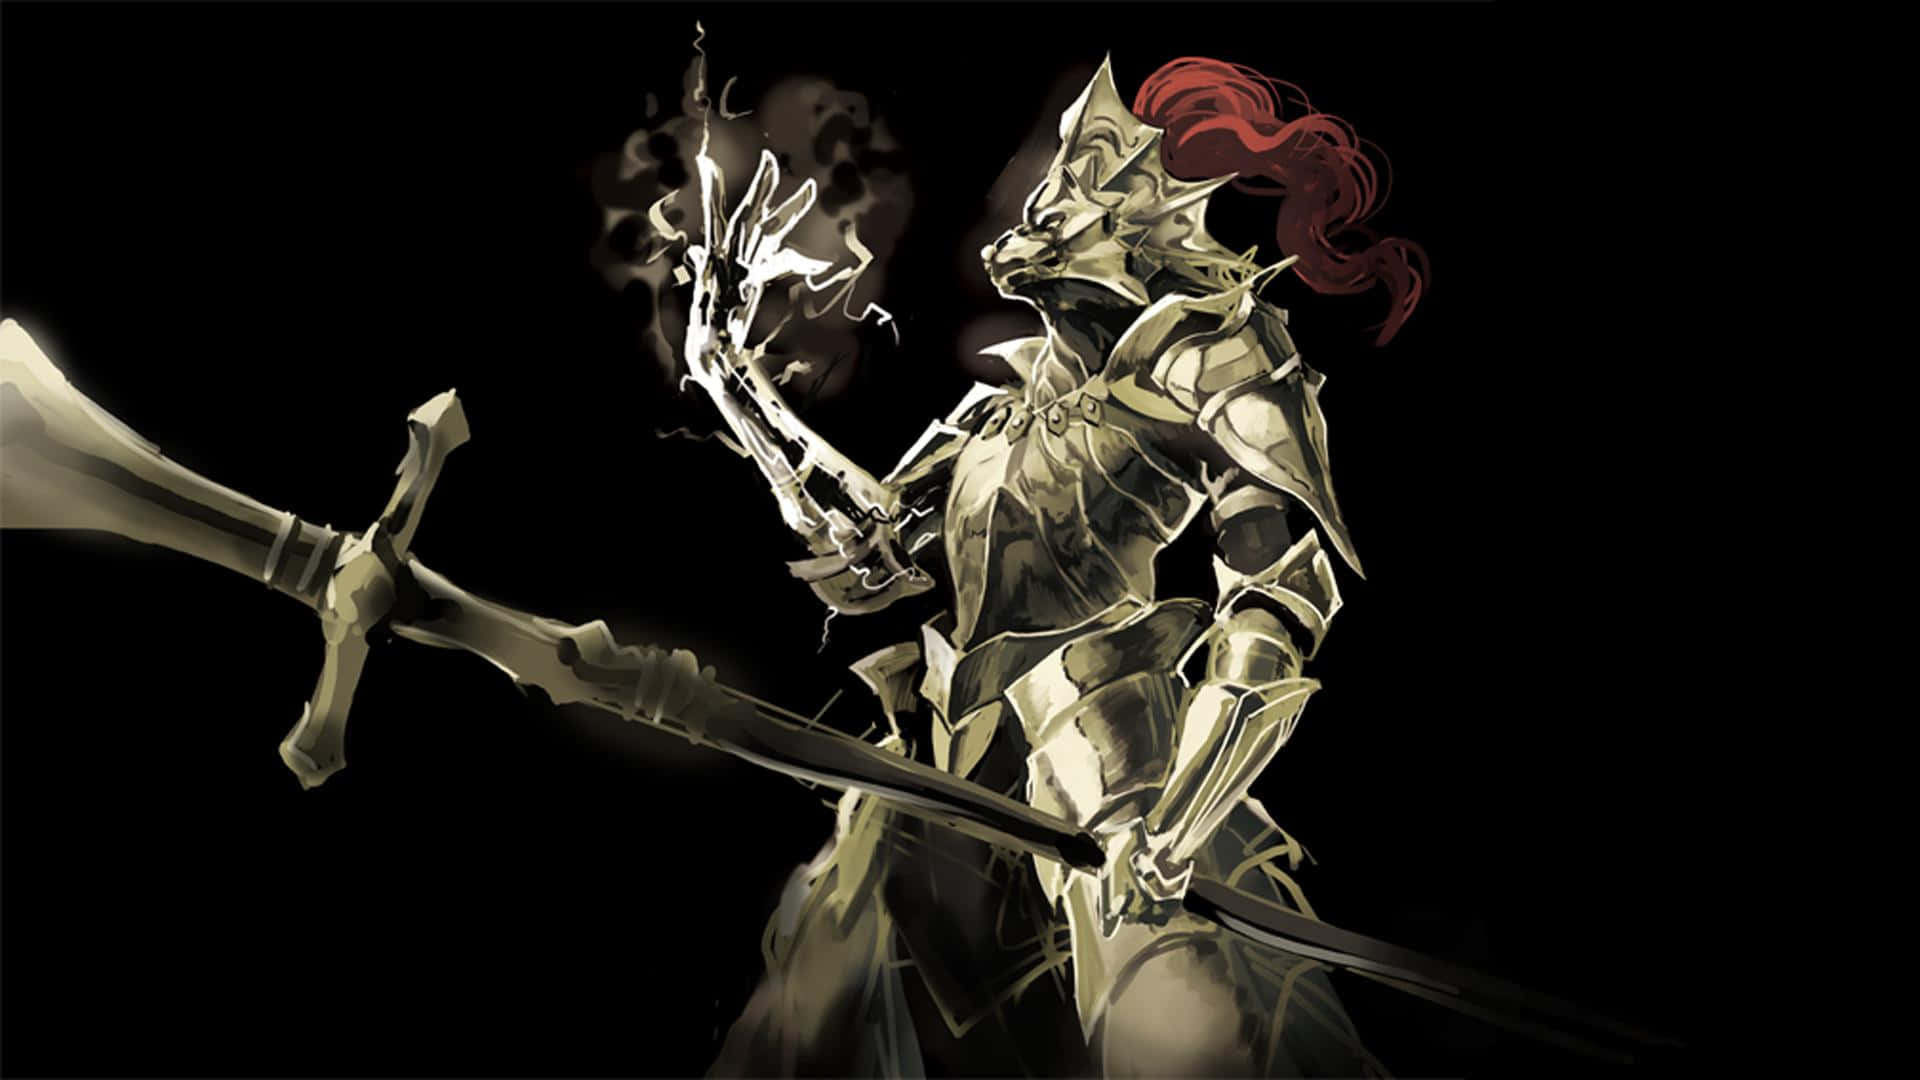 Dragon Slayer Ornstein, the formidable knight in action Wallpaper